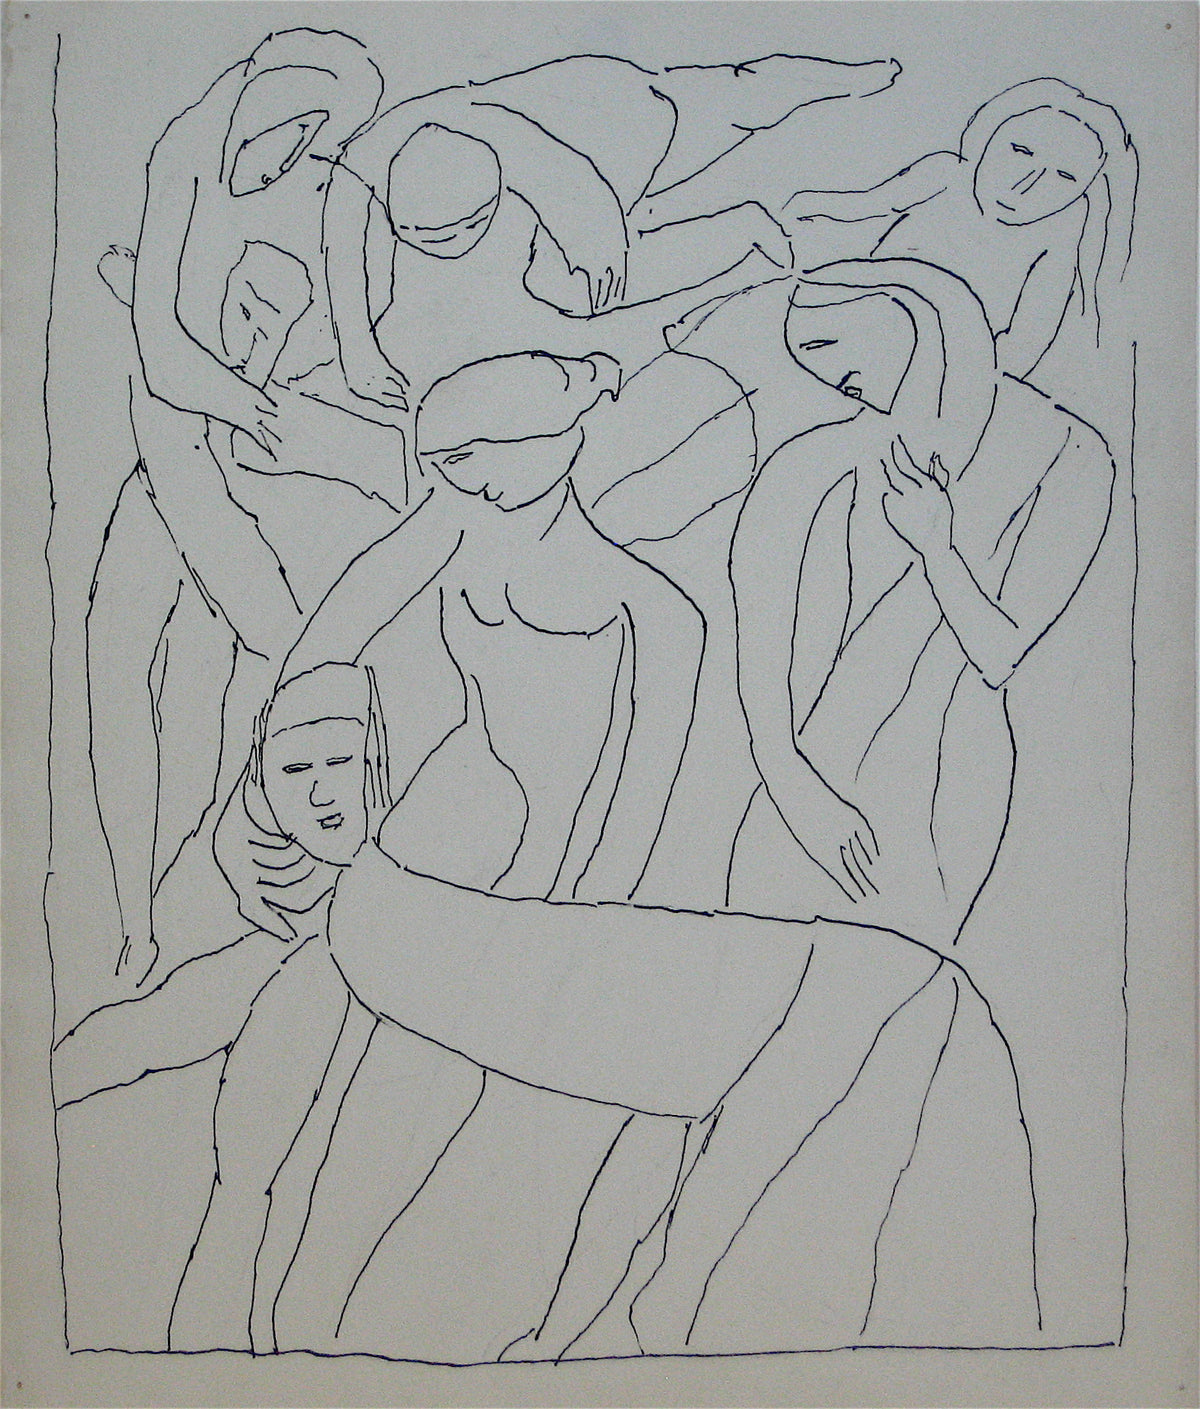 Abstracted Group of Figures&lt;br&gt;Early 20th Century Ink&lt;br&gt;&lt;br&gt;#11229